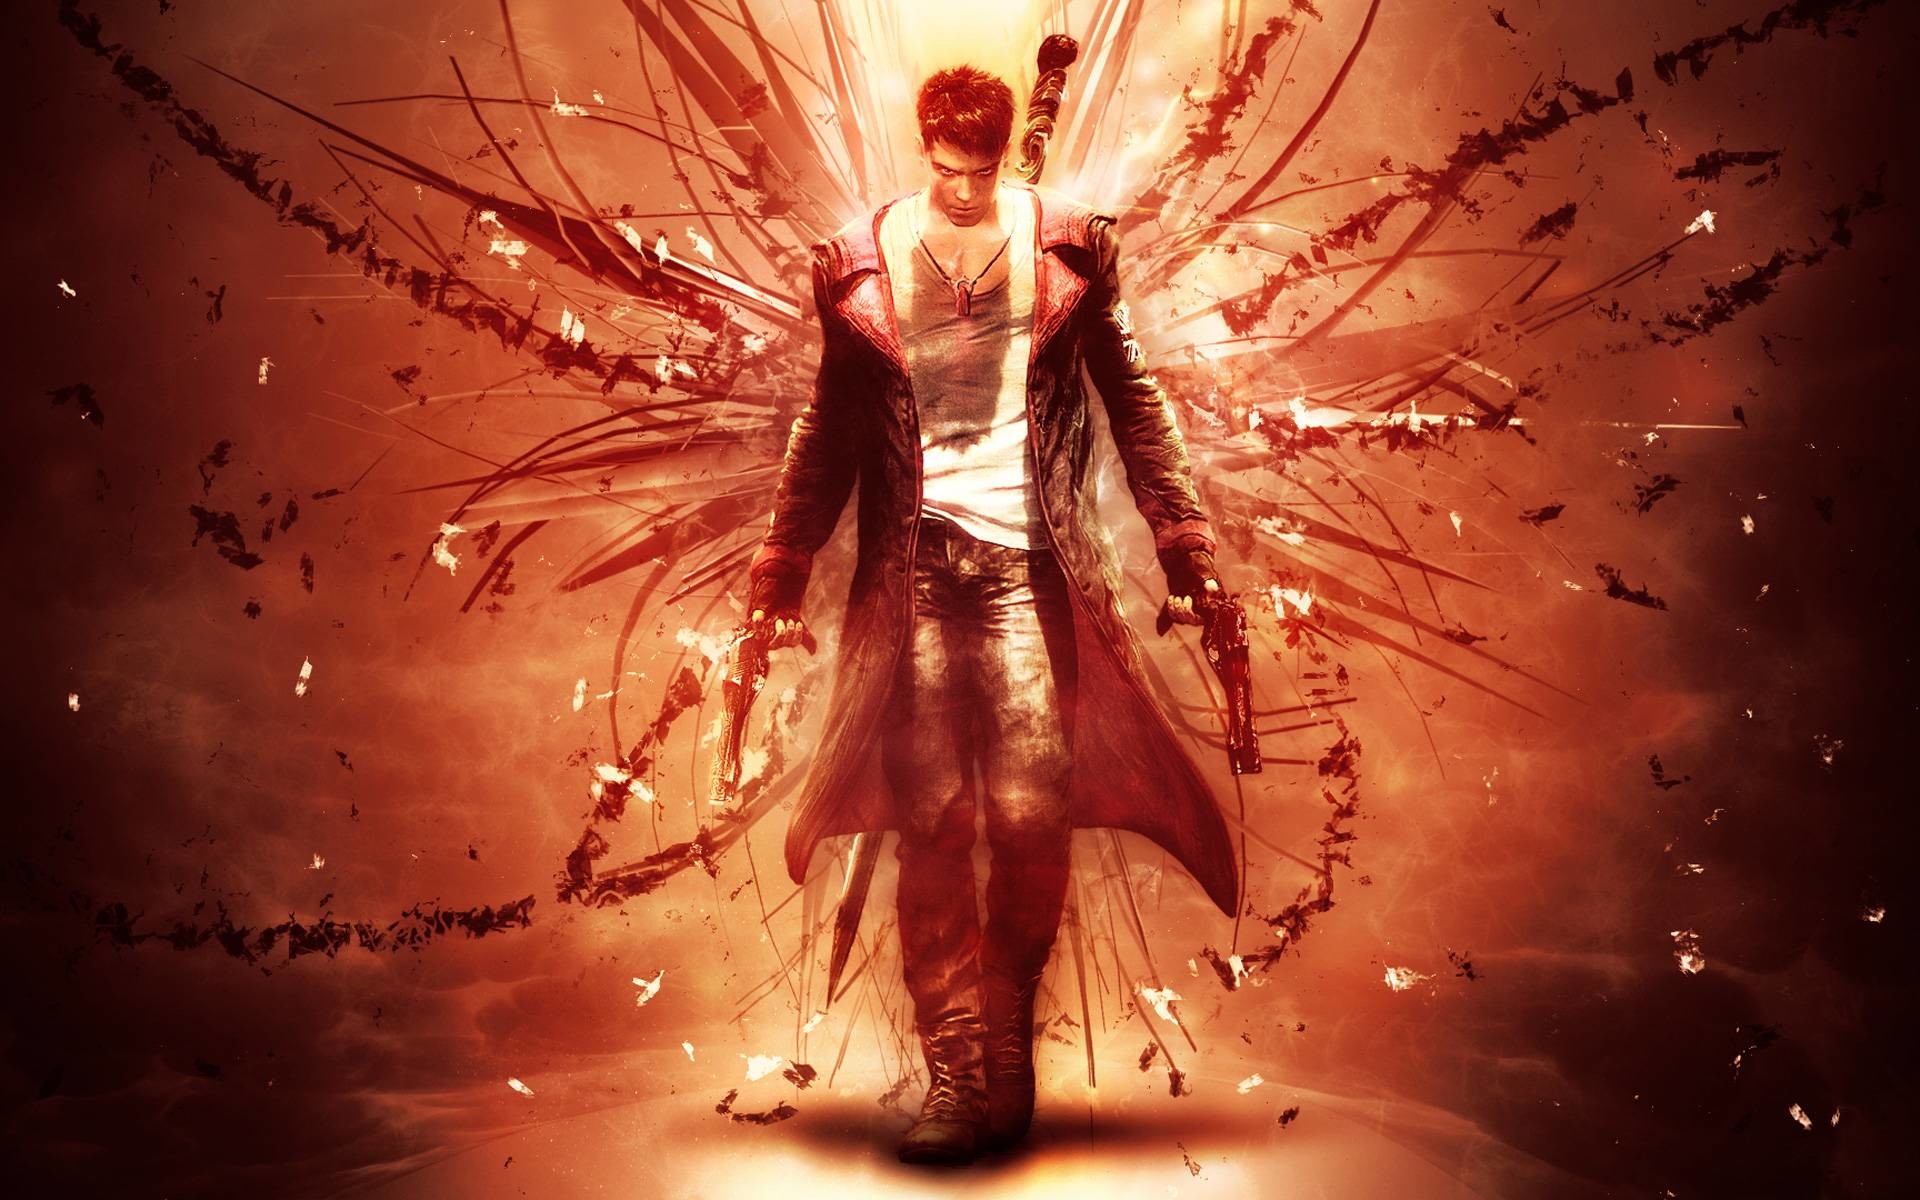 1920x1200 DmC Devil May Cry Wallpapers In HD Â« GamingBolt.com: Video Game News .